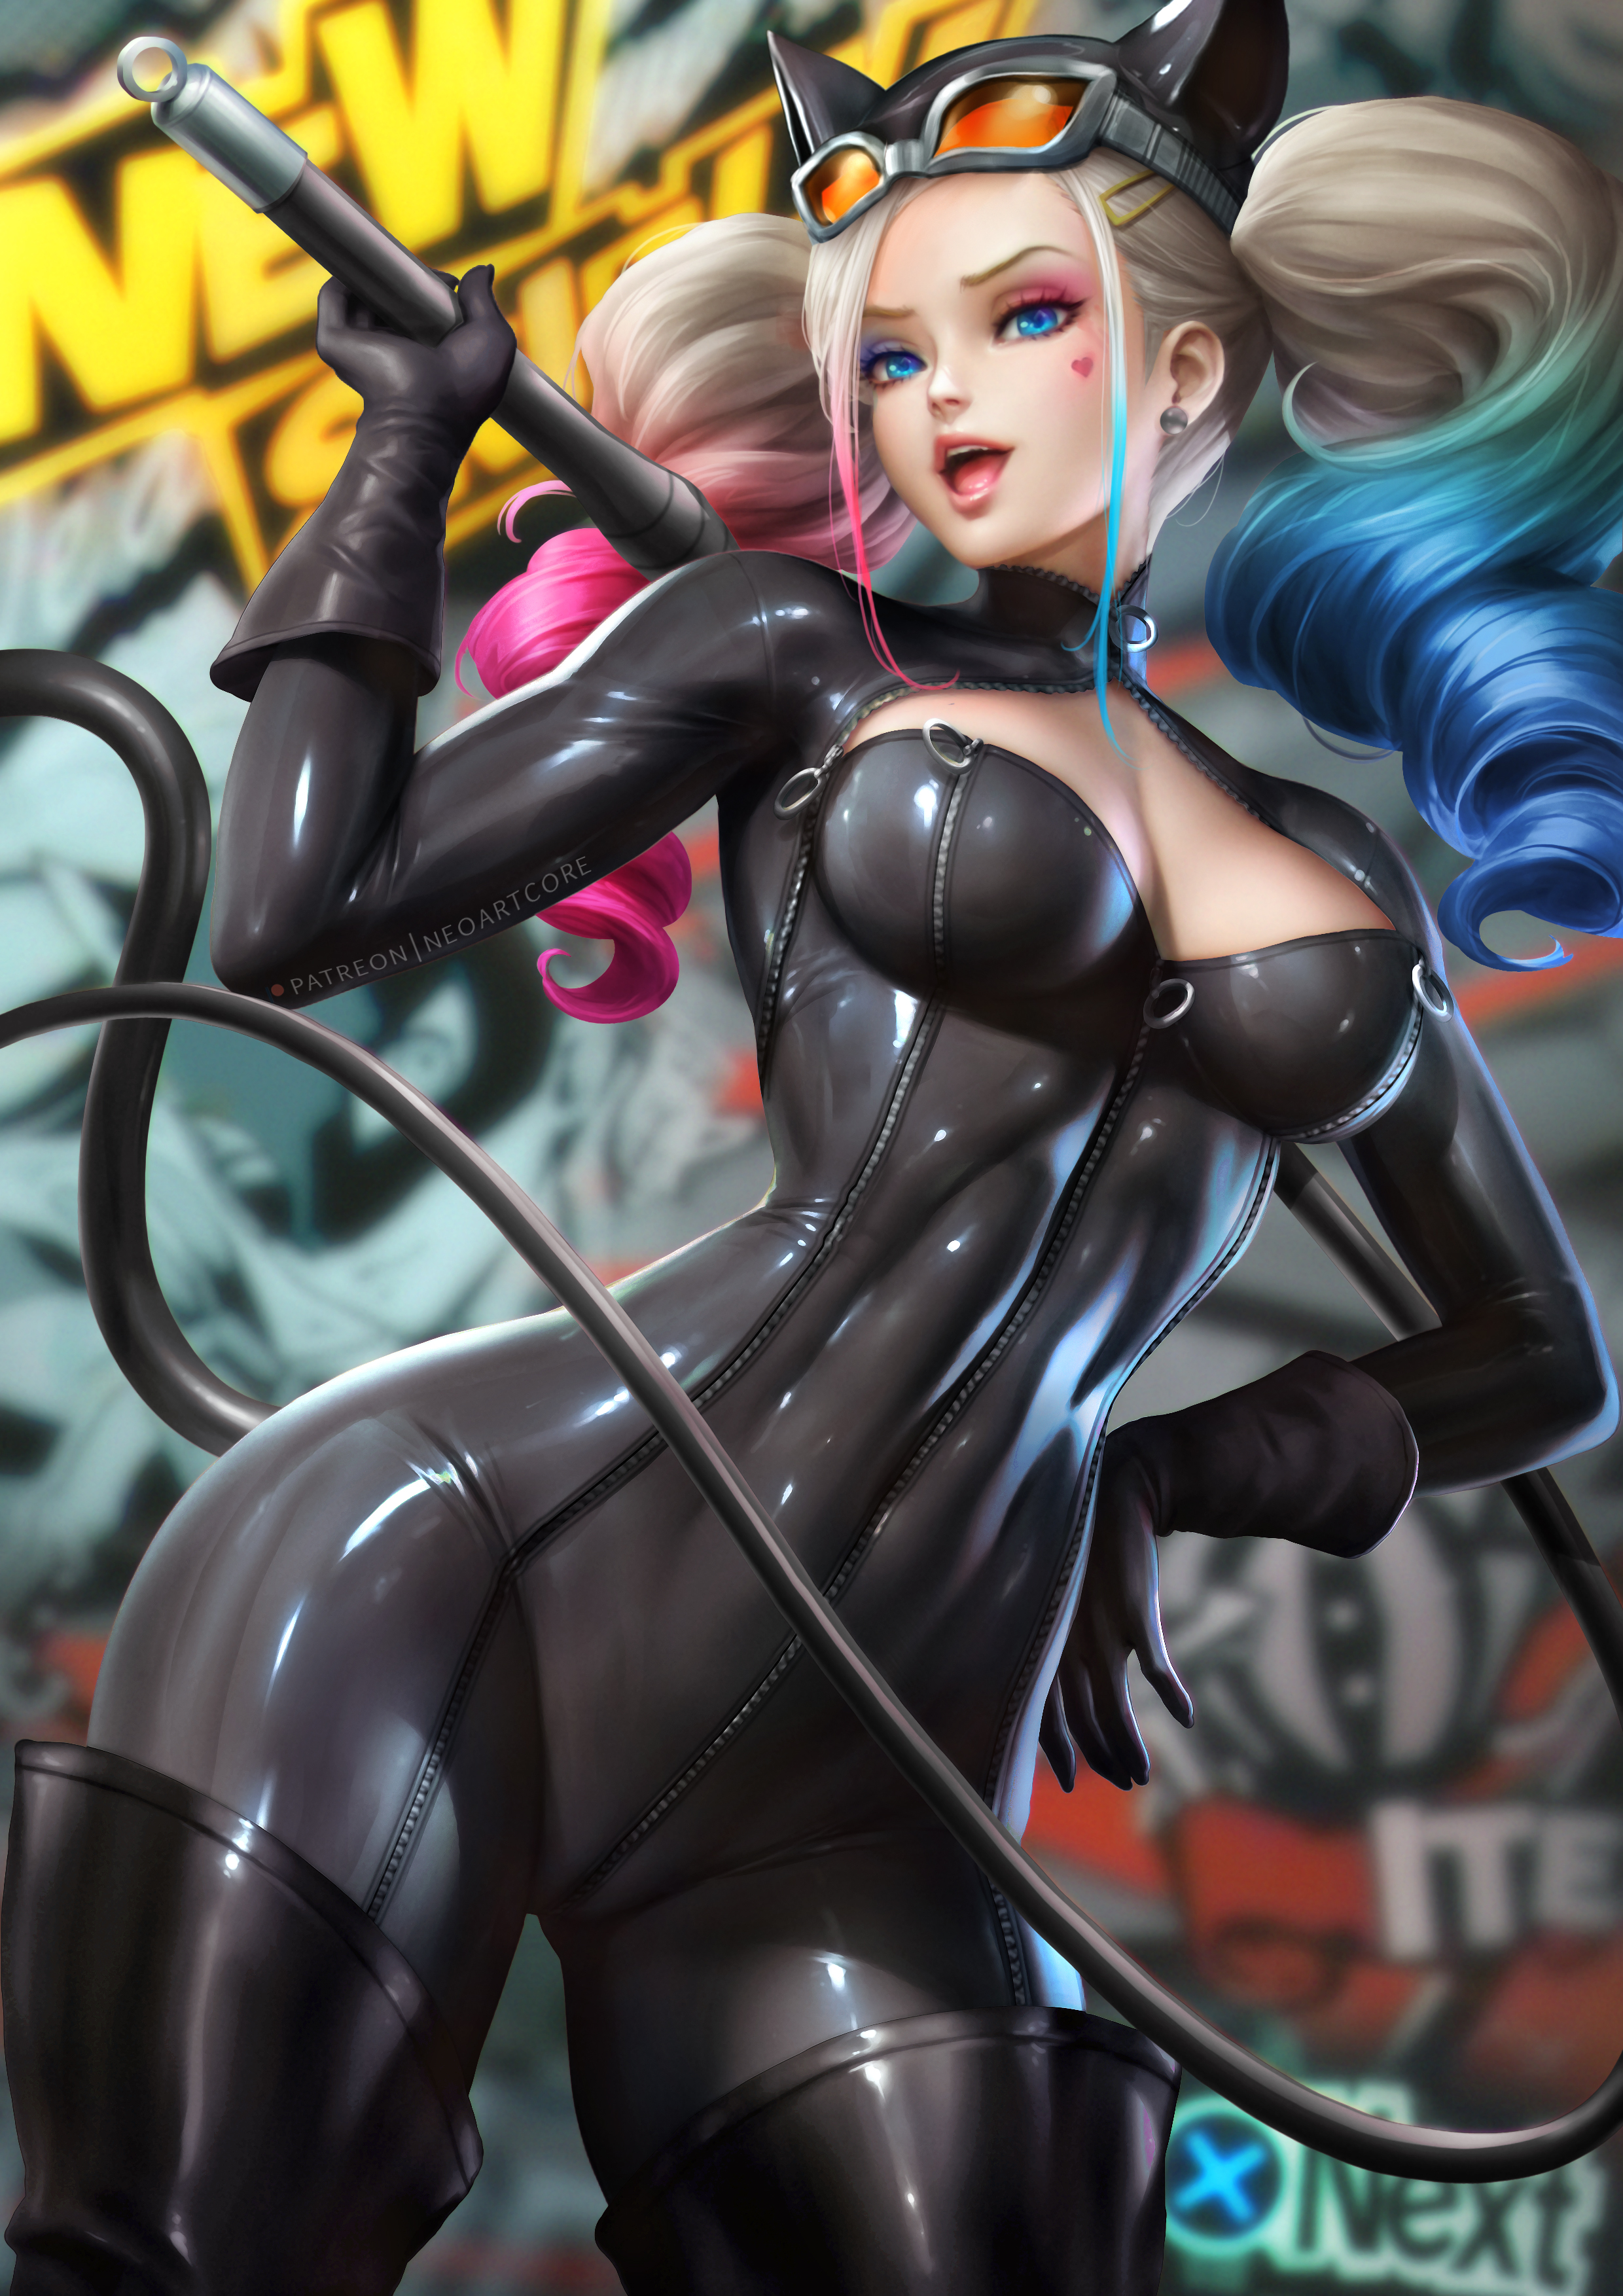 Catwoman NeoArtCorE Artist Cosplay Tight Clothing Whips Gloves Mask Goggles Blonde Wide Hips Vertica 2480x3508